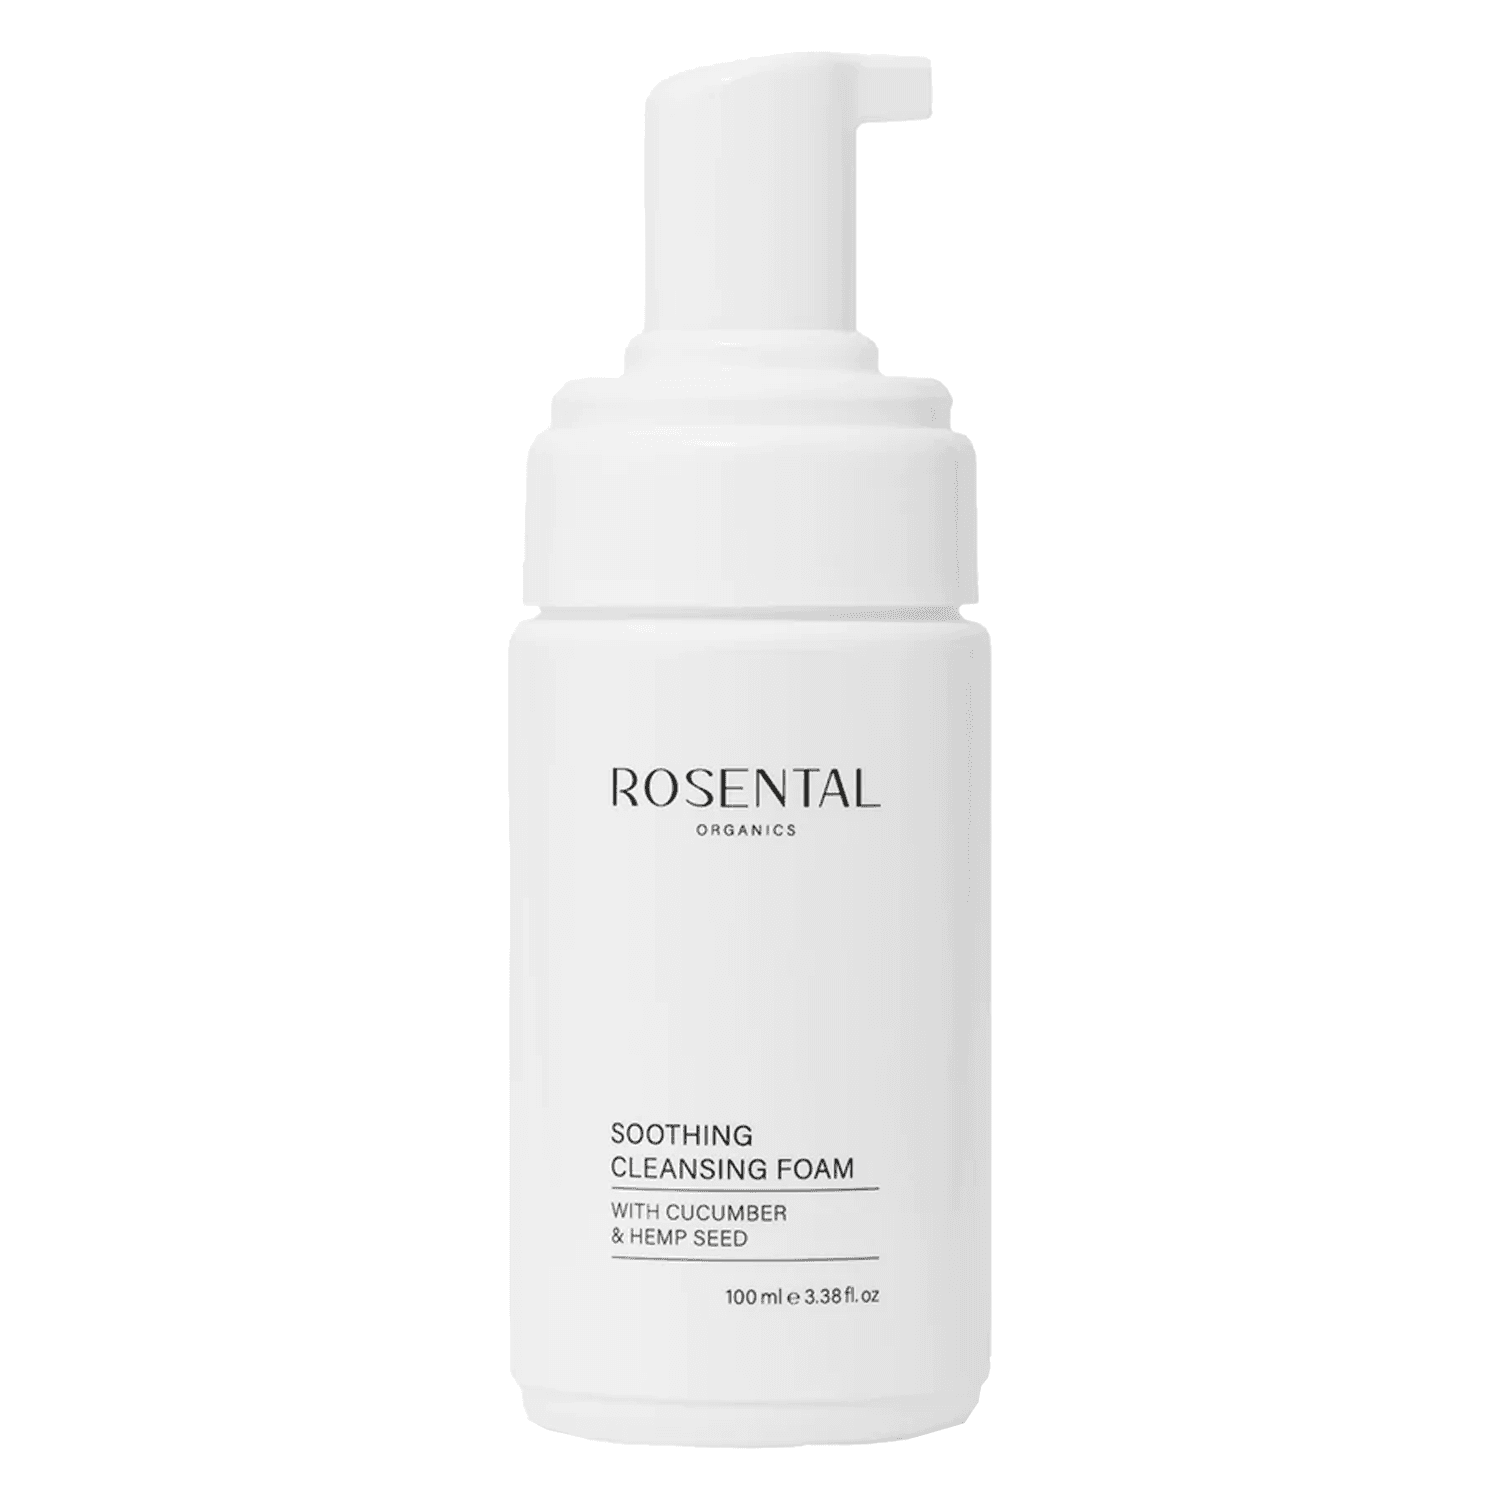 Rosental Face Care - Soothing Cleansing Foam